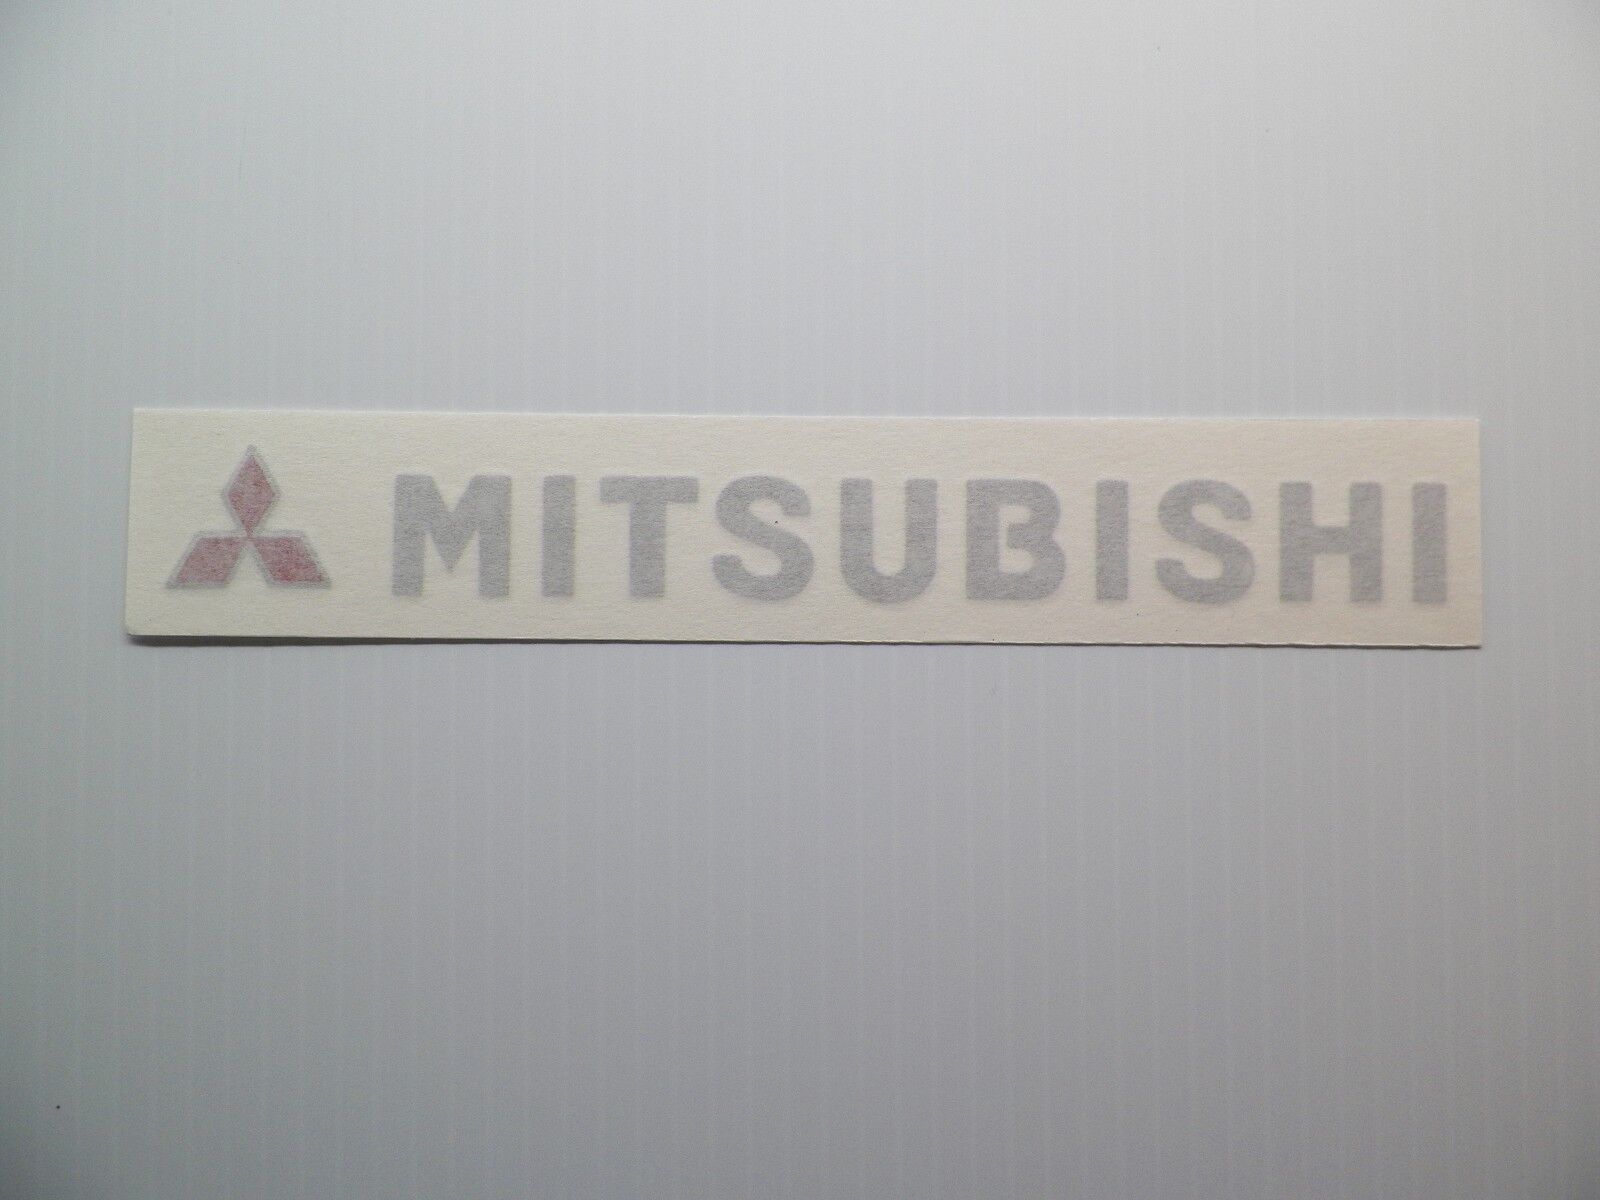 New 93-99 Mitsubishi Rear Logo Flat Badge Decal Eclipse Mirage FTO GS-T GSX GS